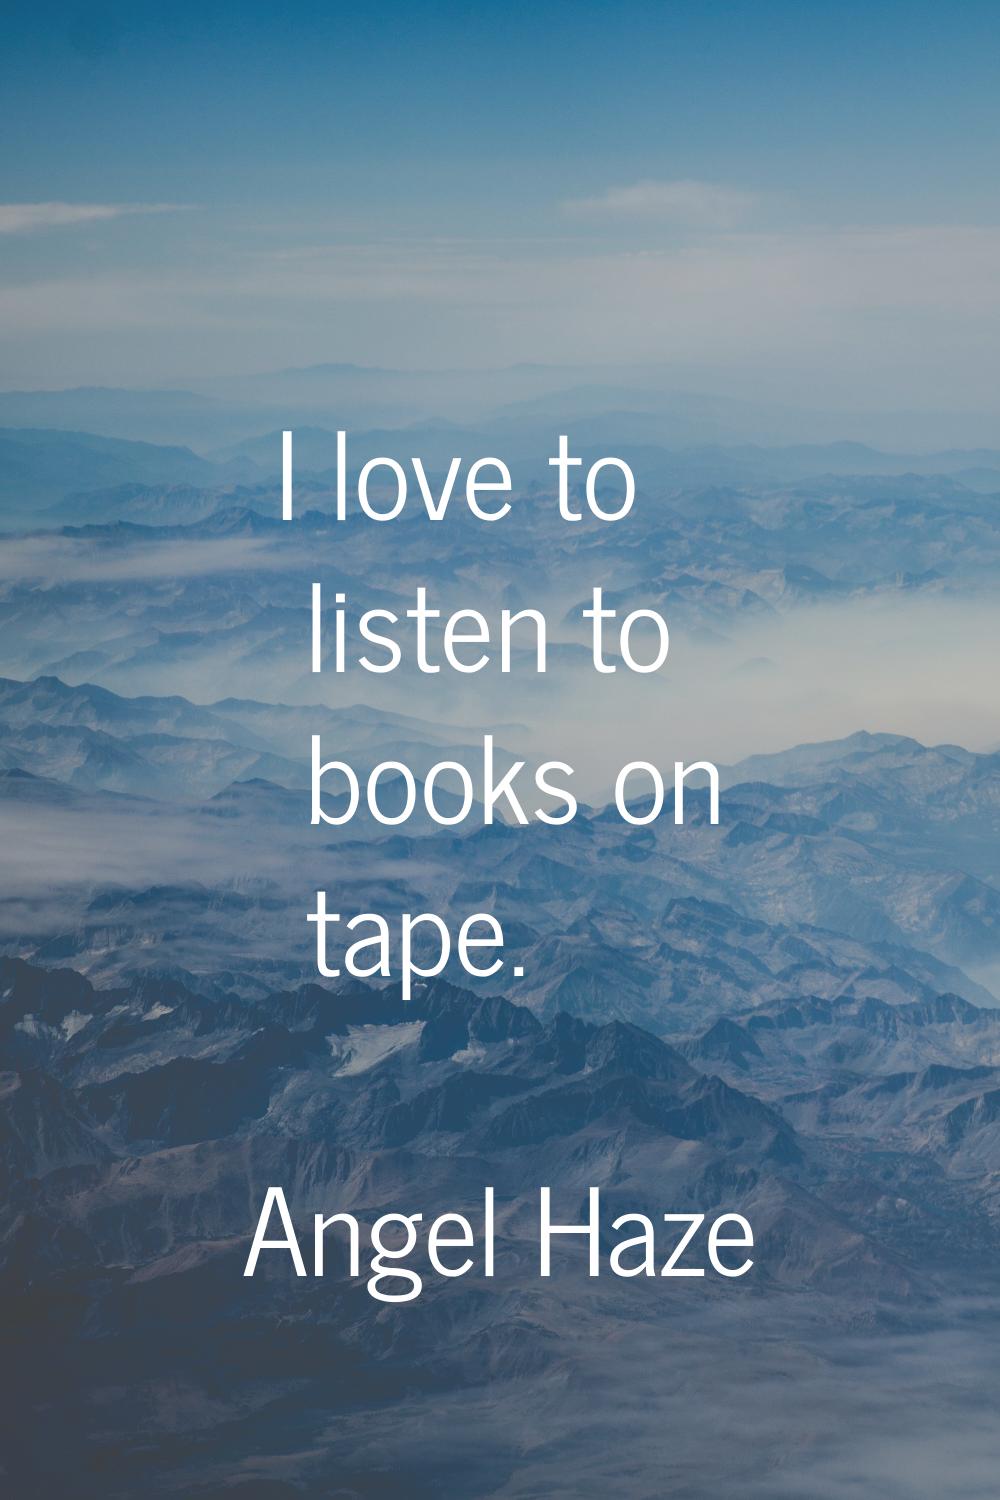 I love to listen to books on tape.